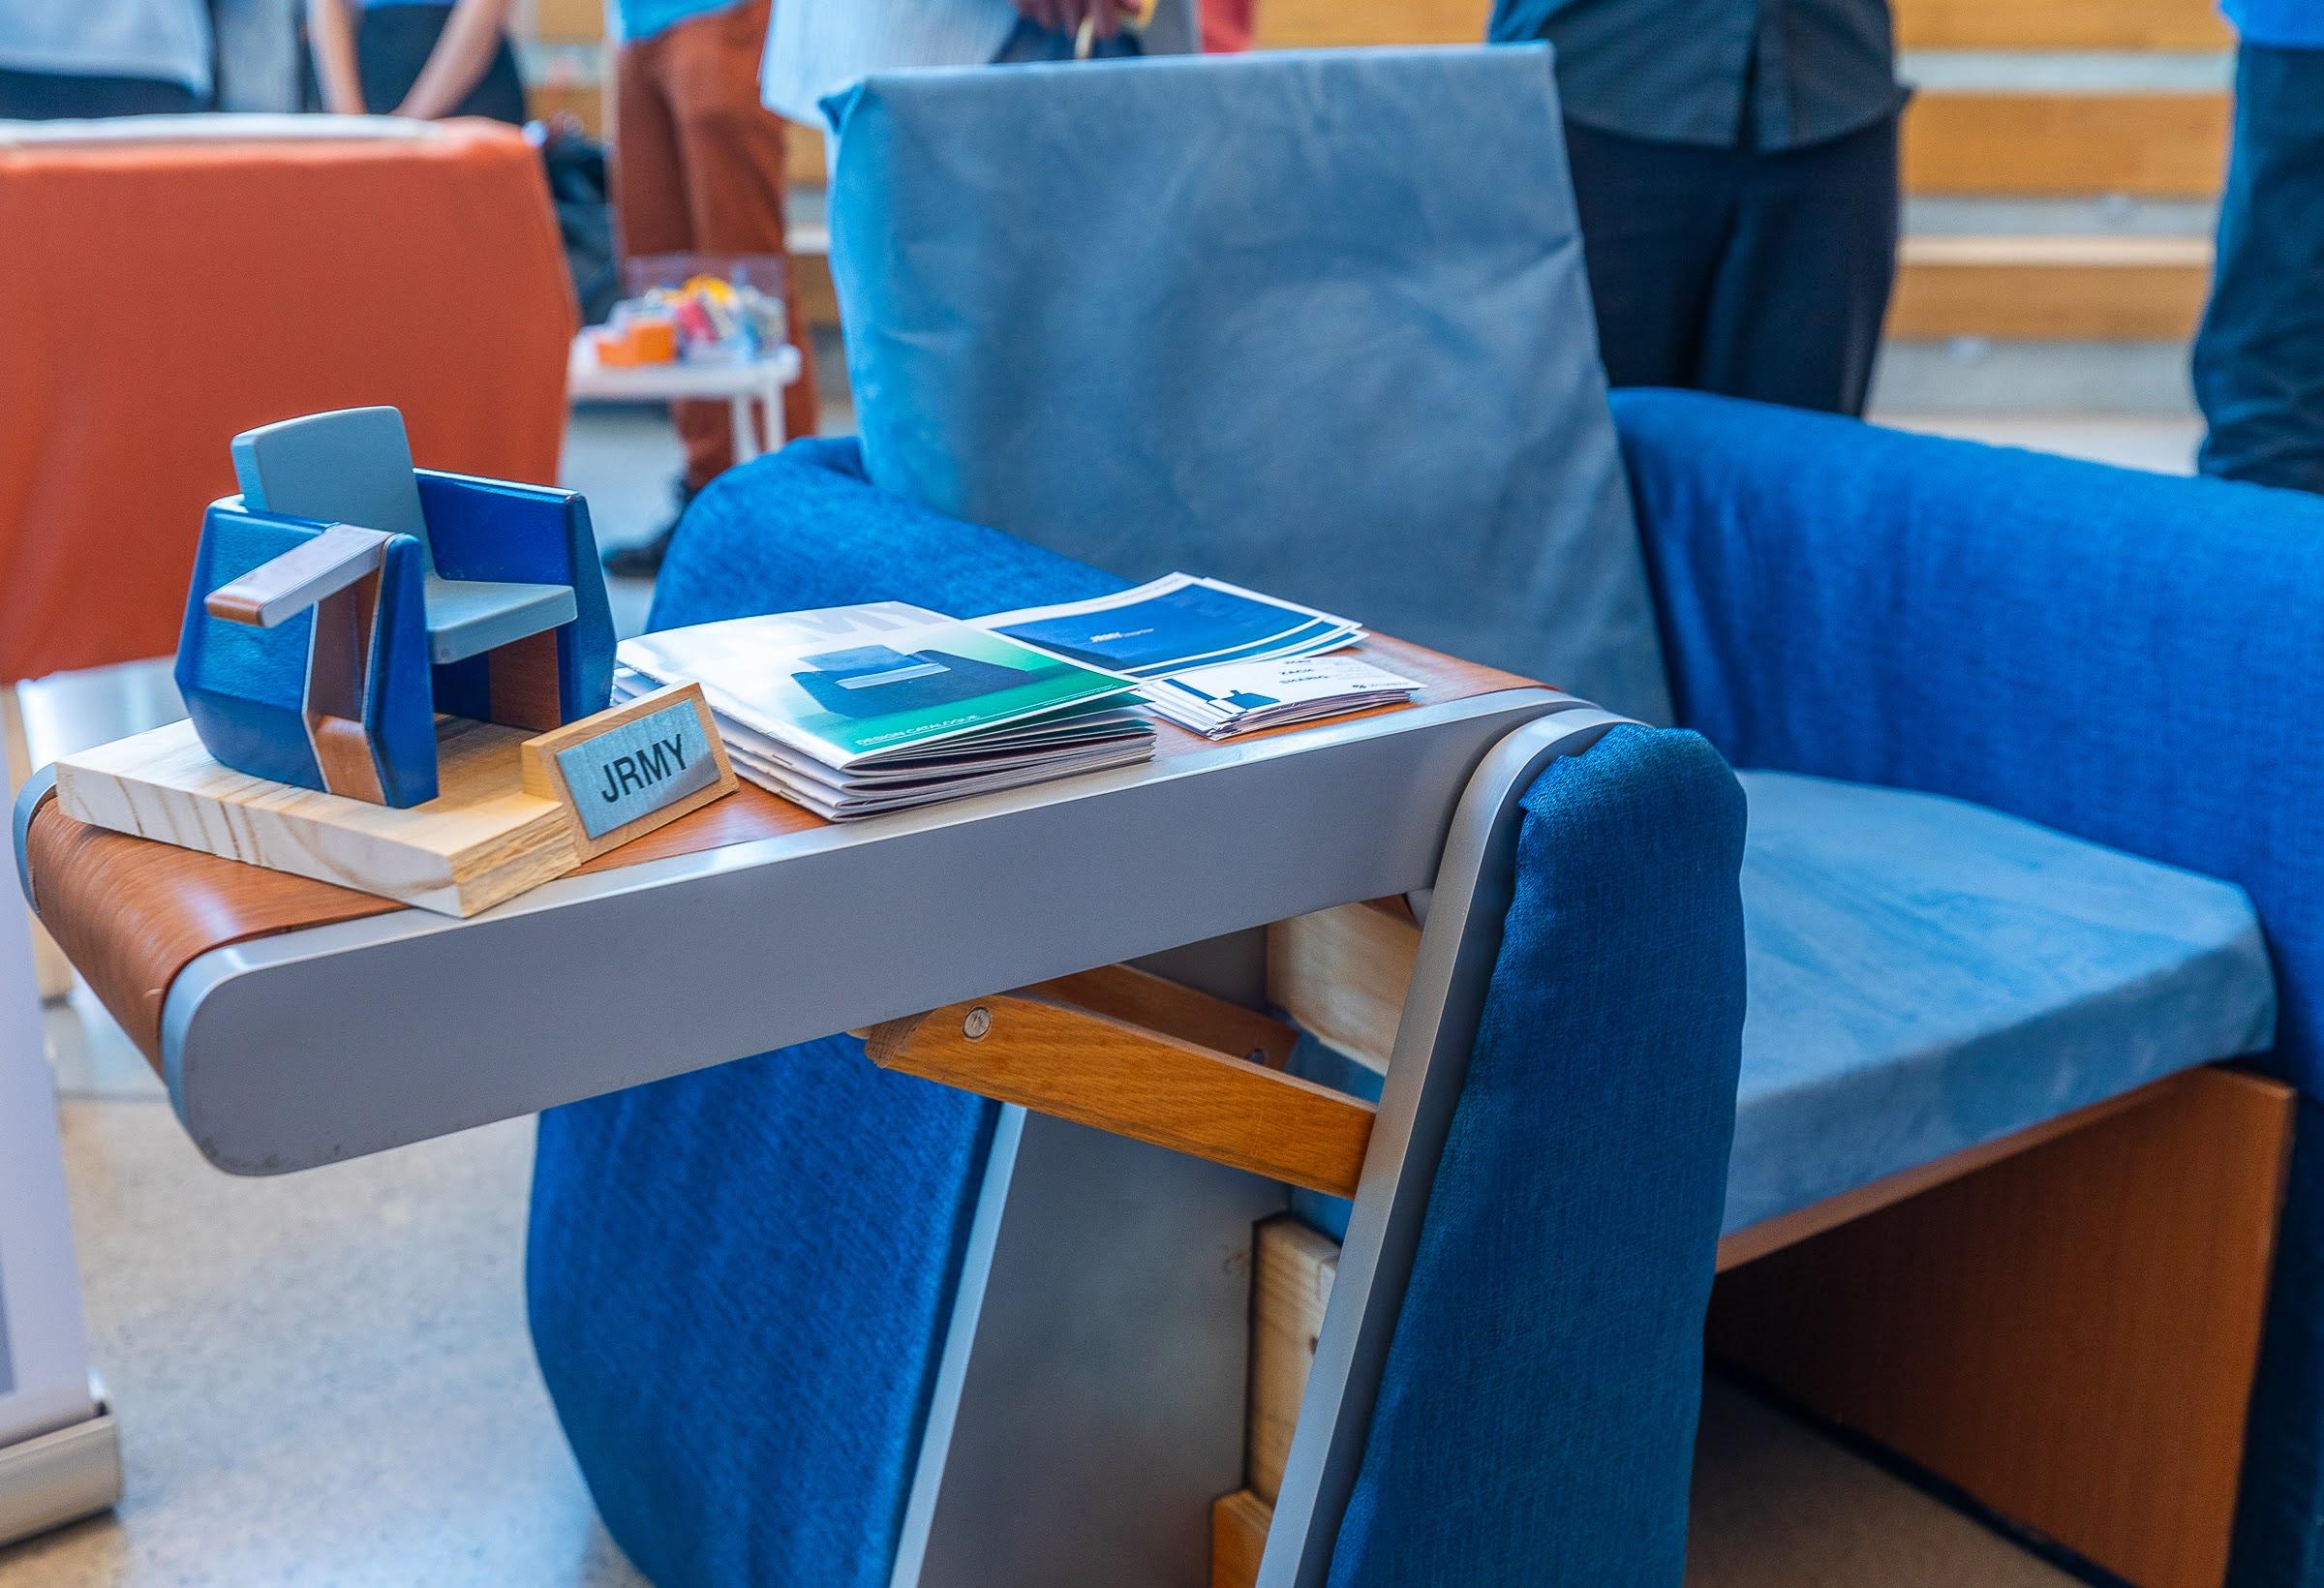 A blue chair that has a miniature replica of it sitting on its armrest along with pamphlets.